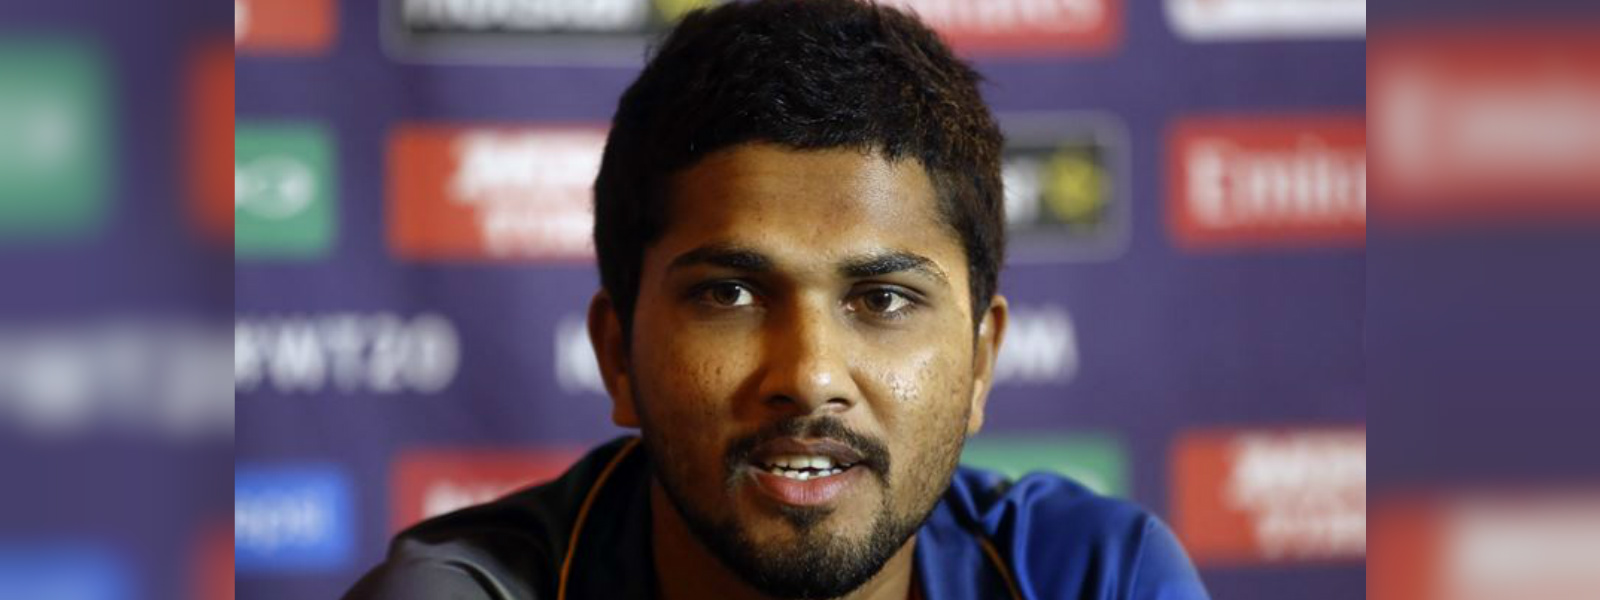 Sri Lanka Captain charged with ball tampering